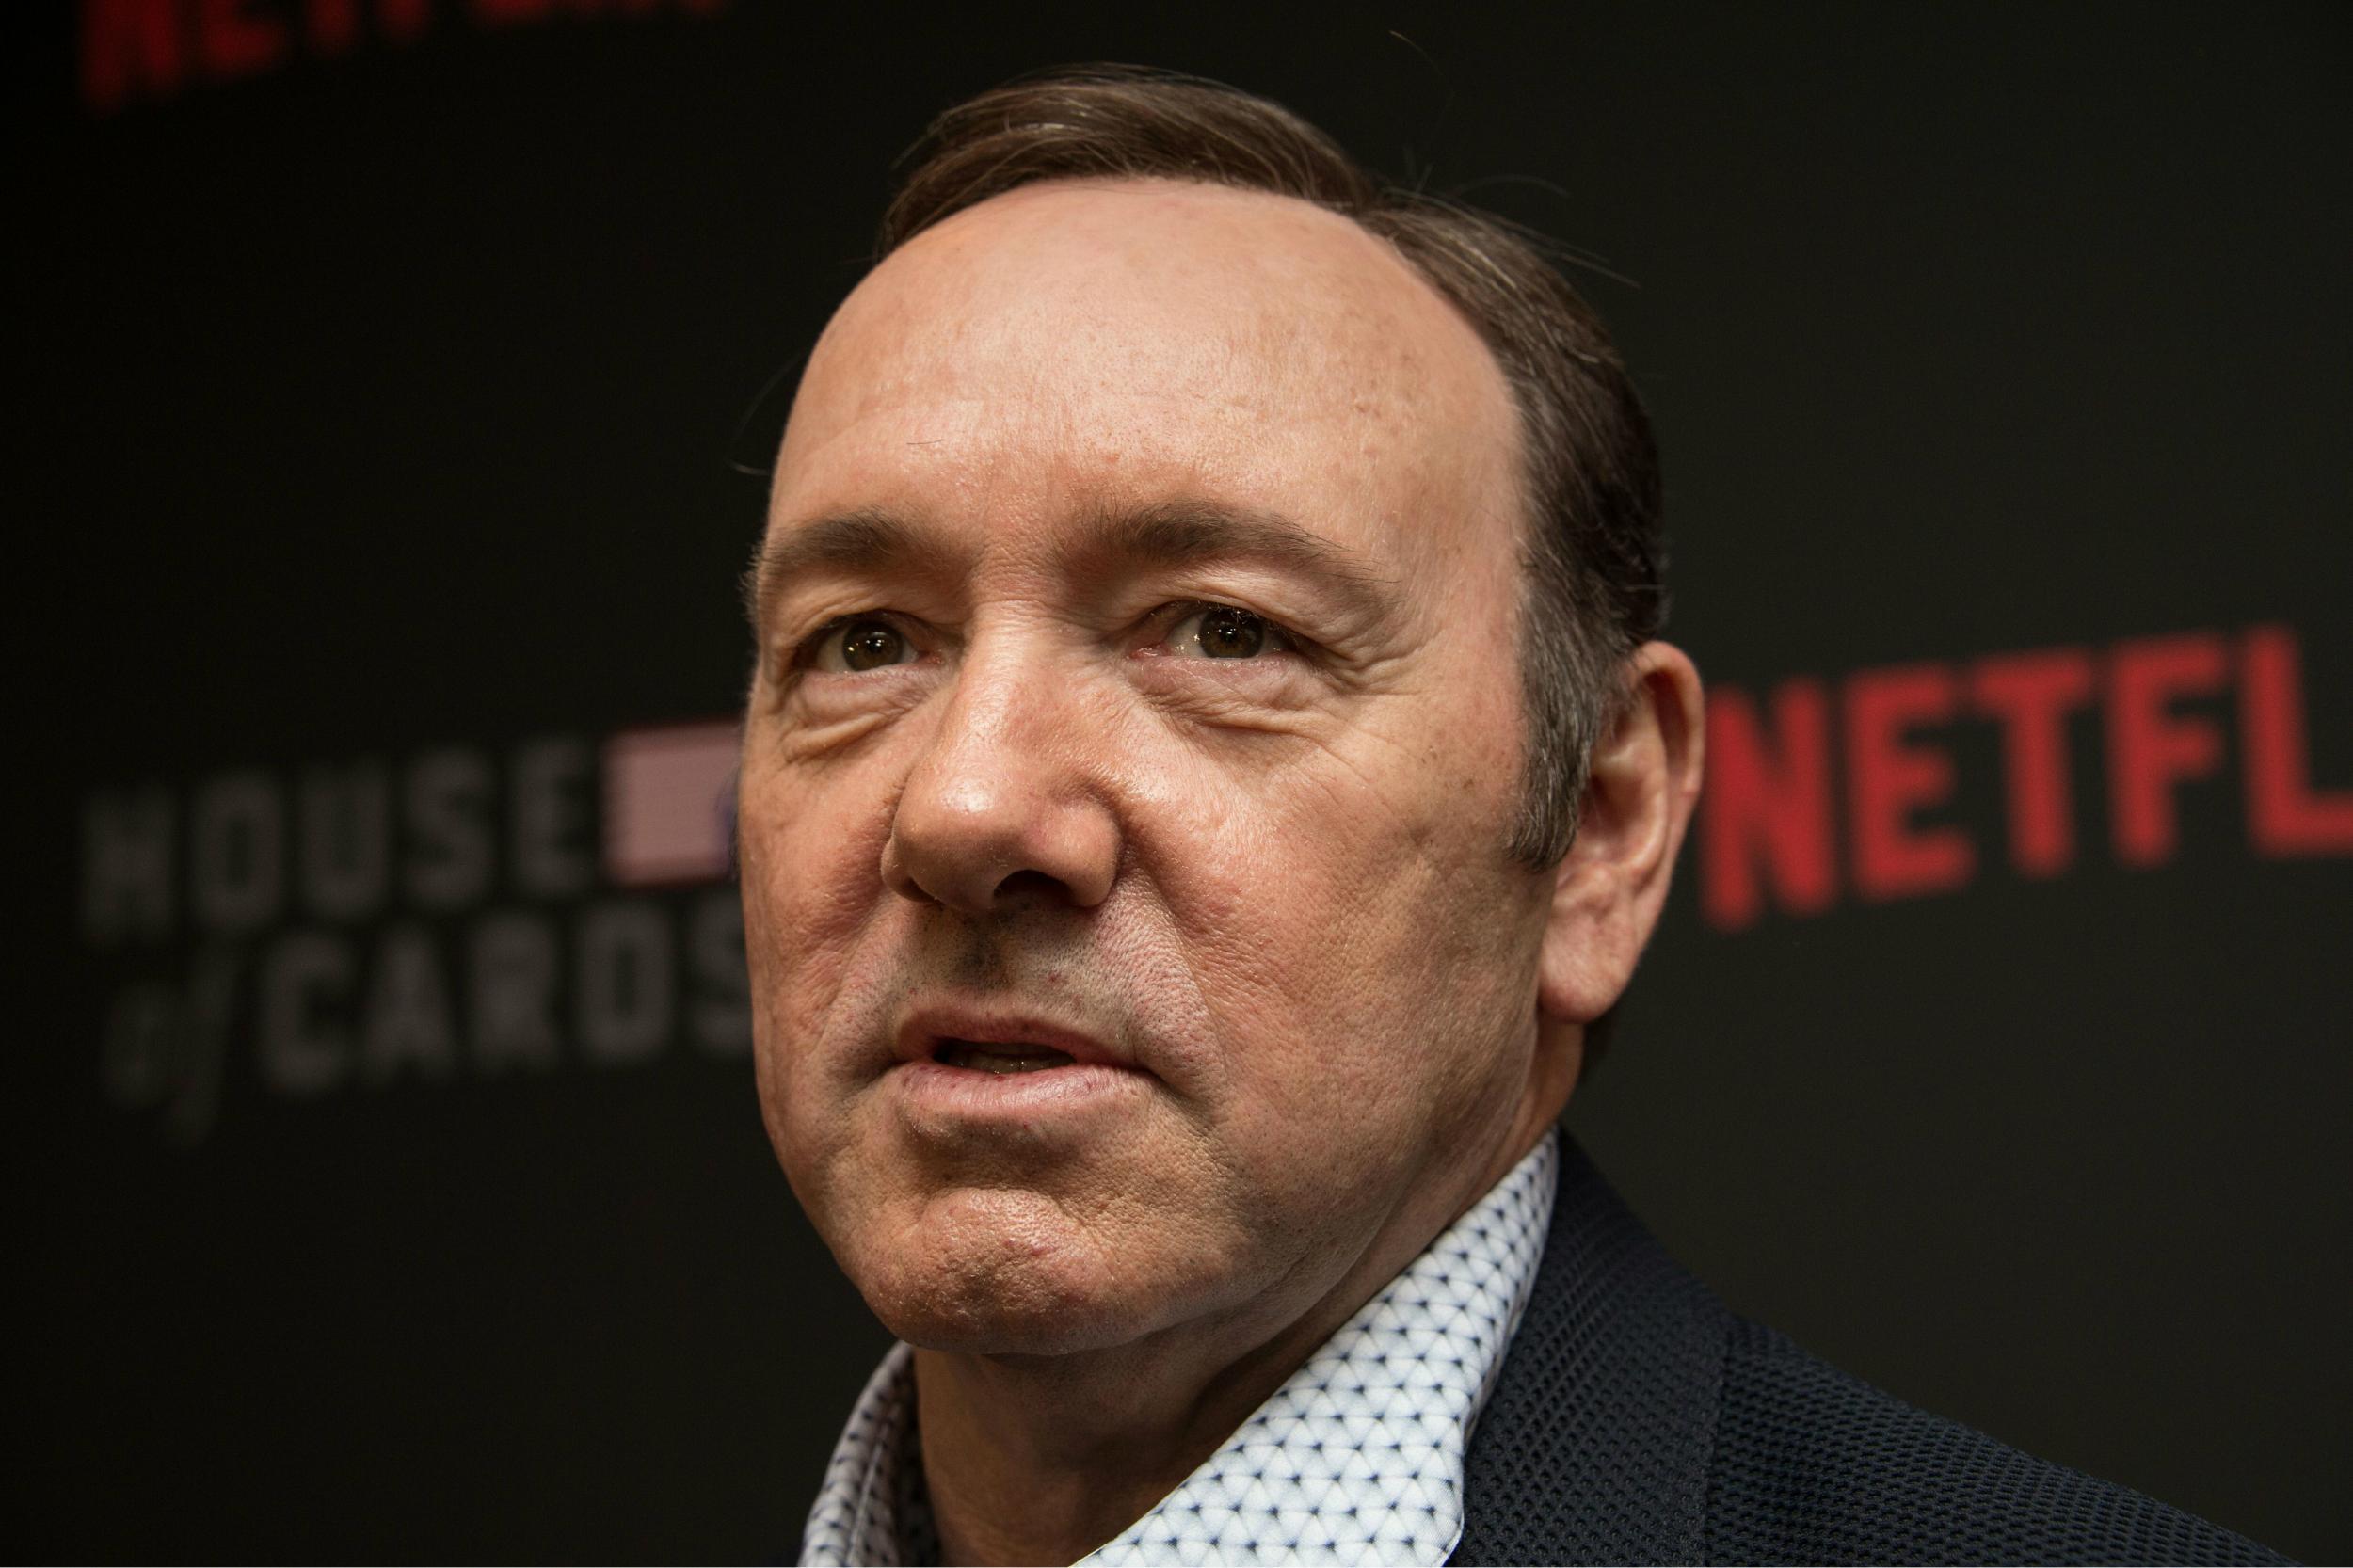 Kevin Spacey has been accused of unwanted sexual advances and Hollywood has reacted